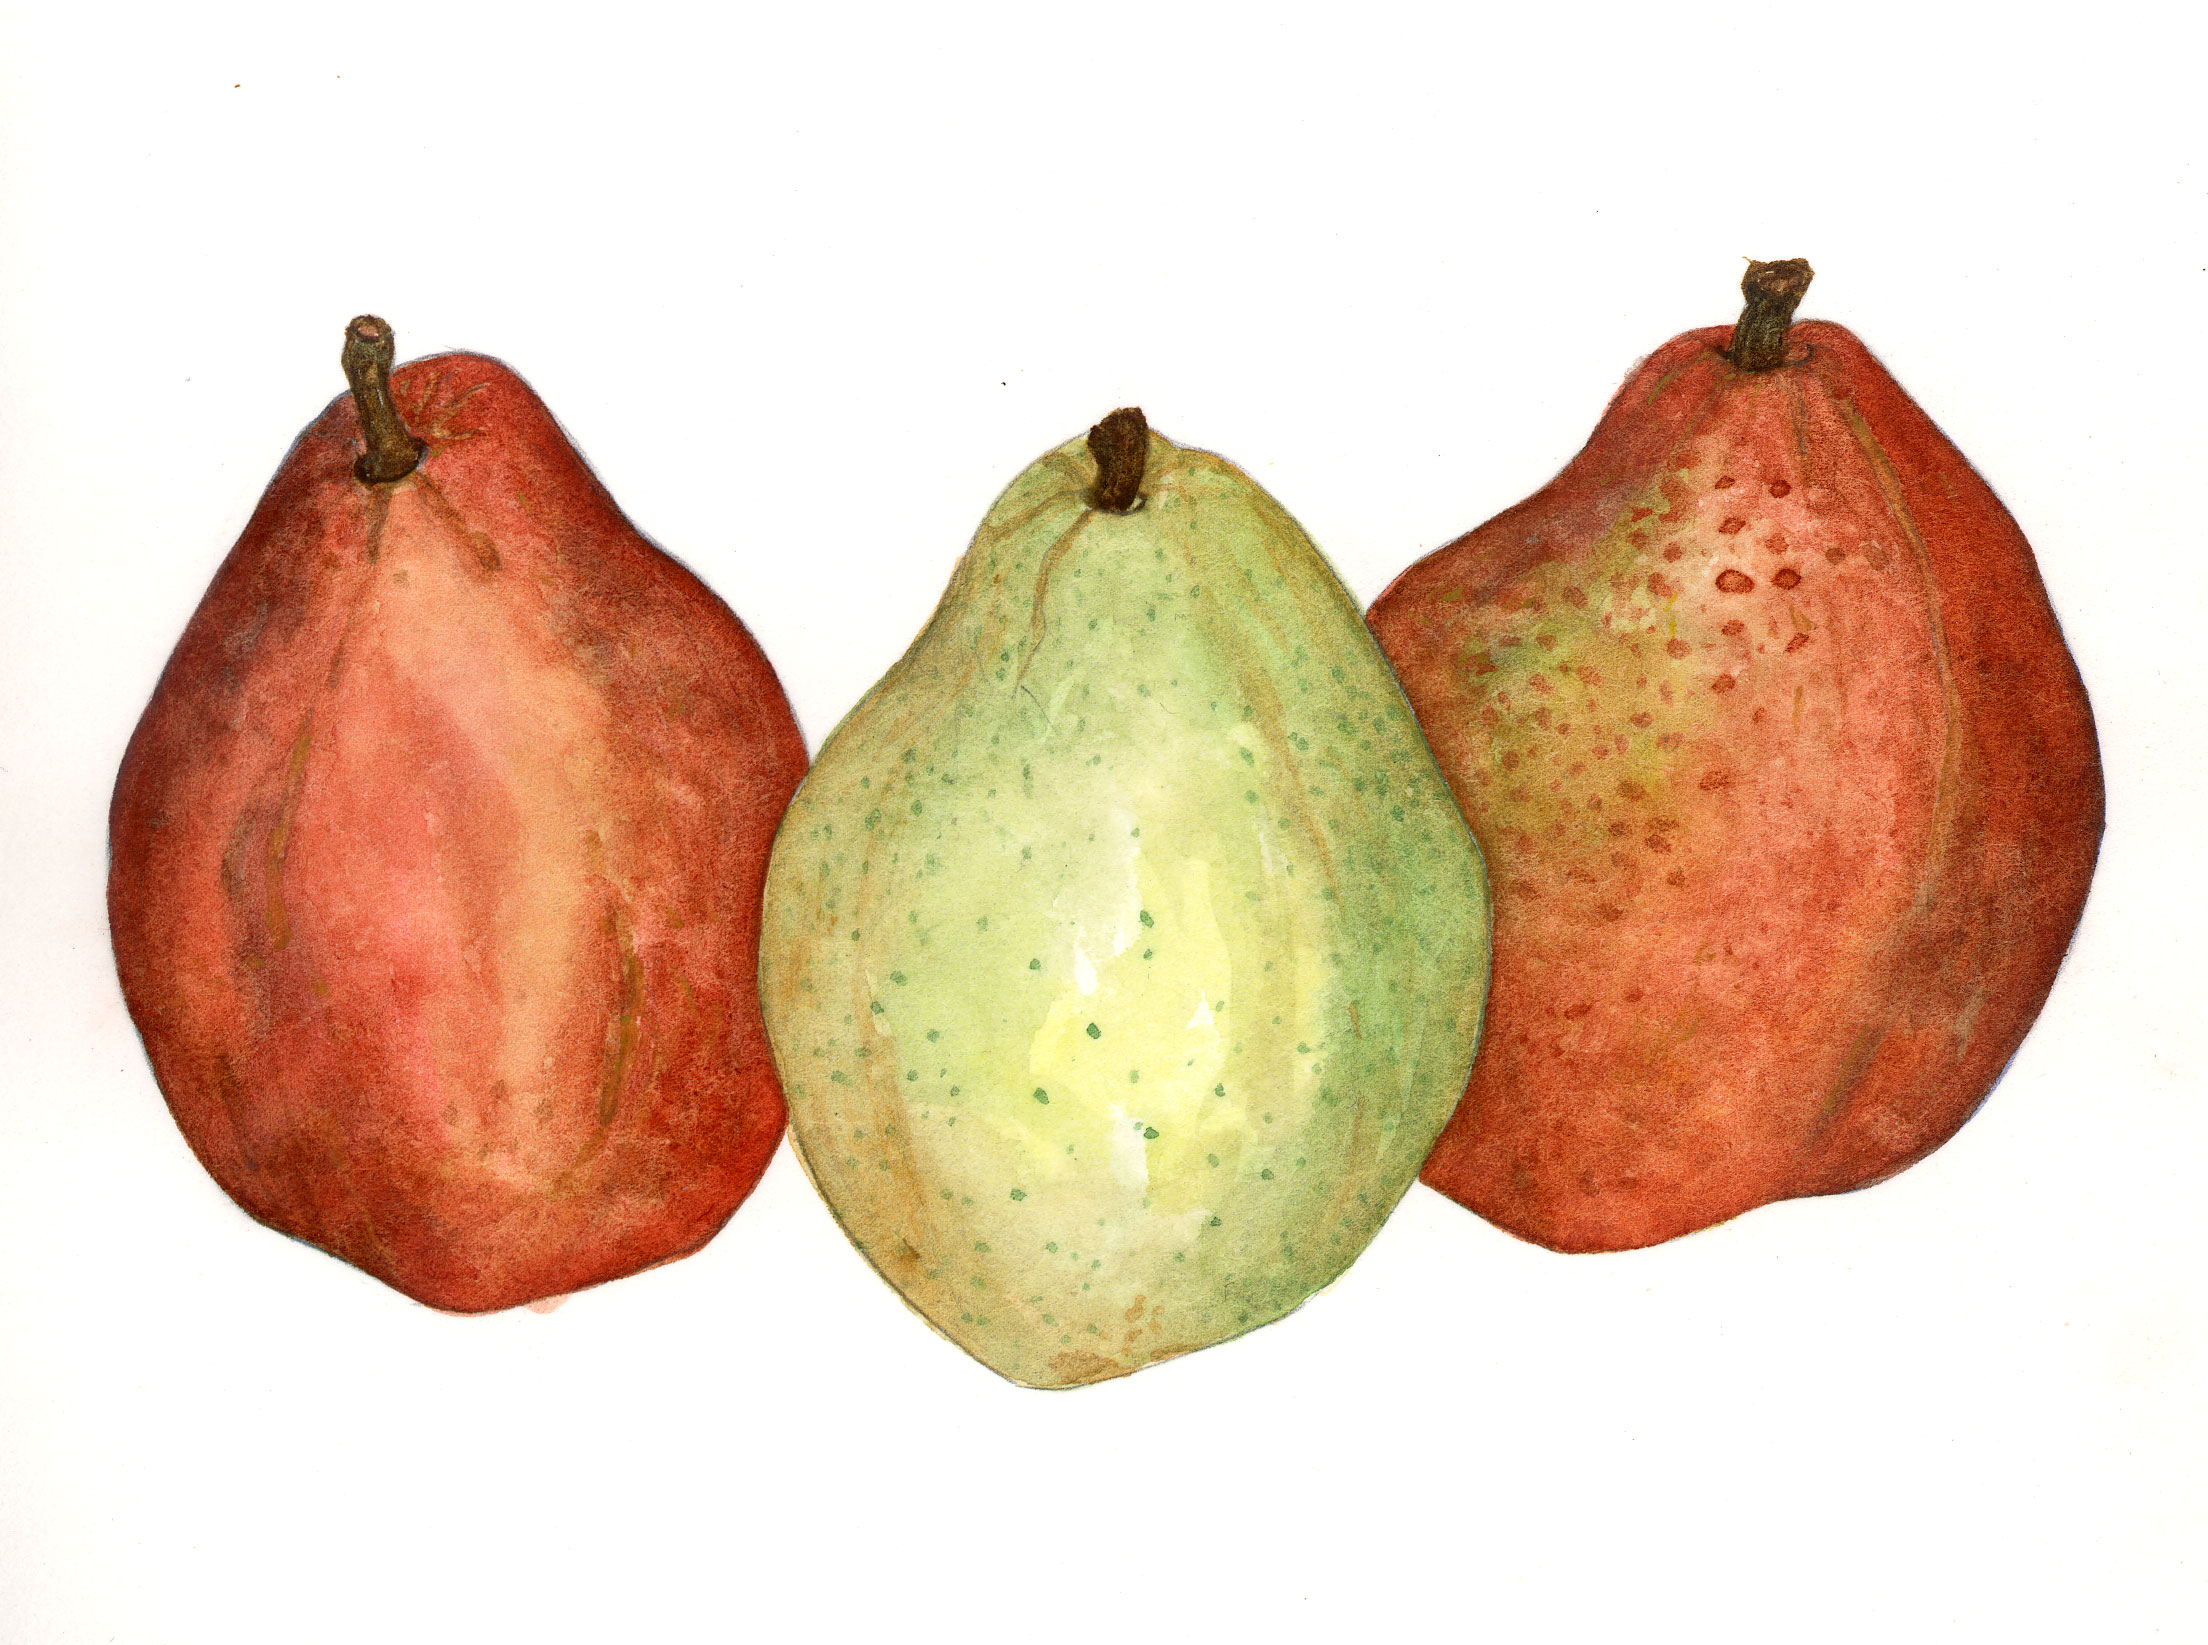 Red & Green Anjou Pears (Pyrus comminus)